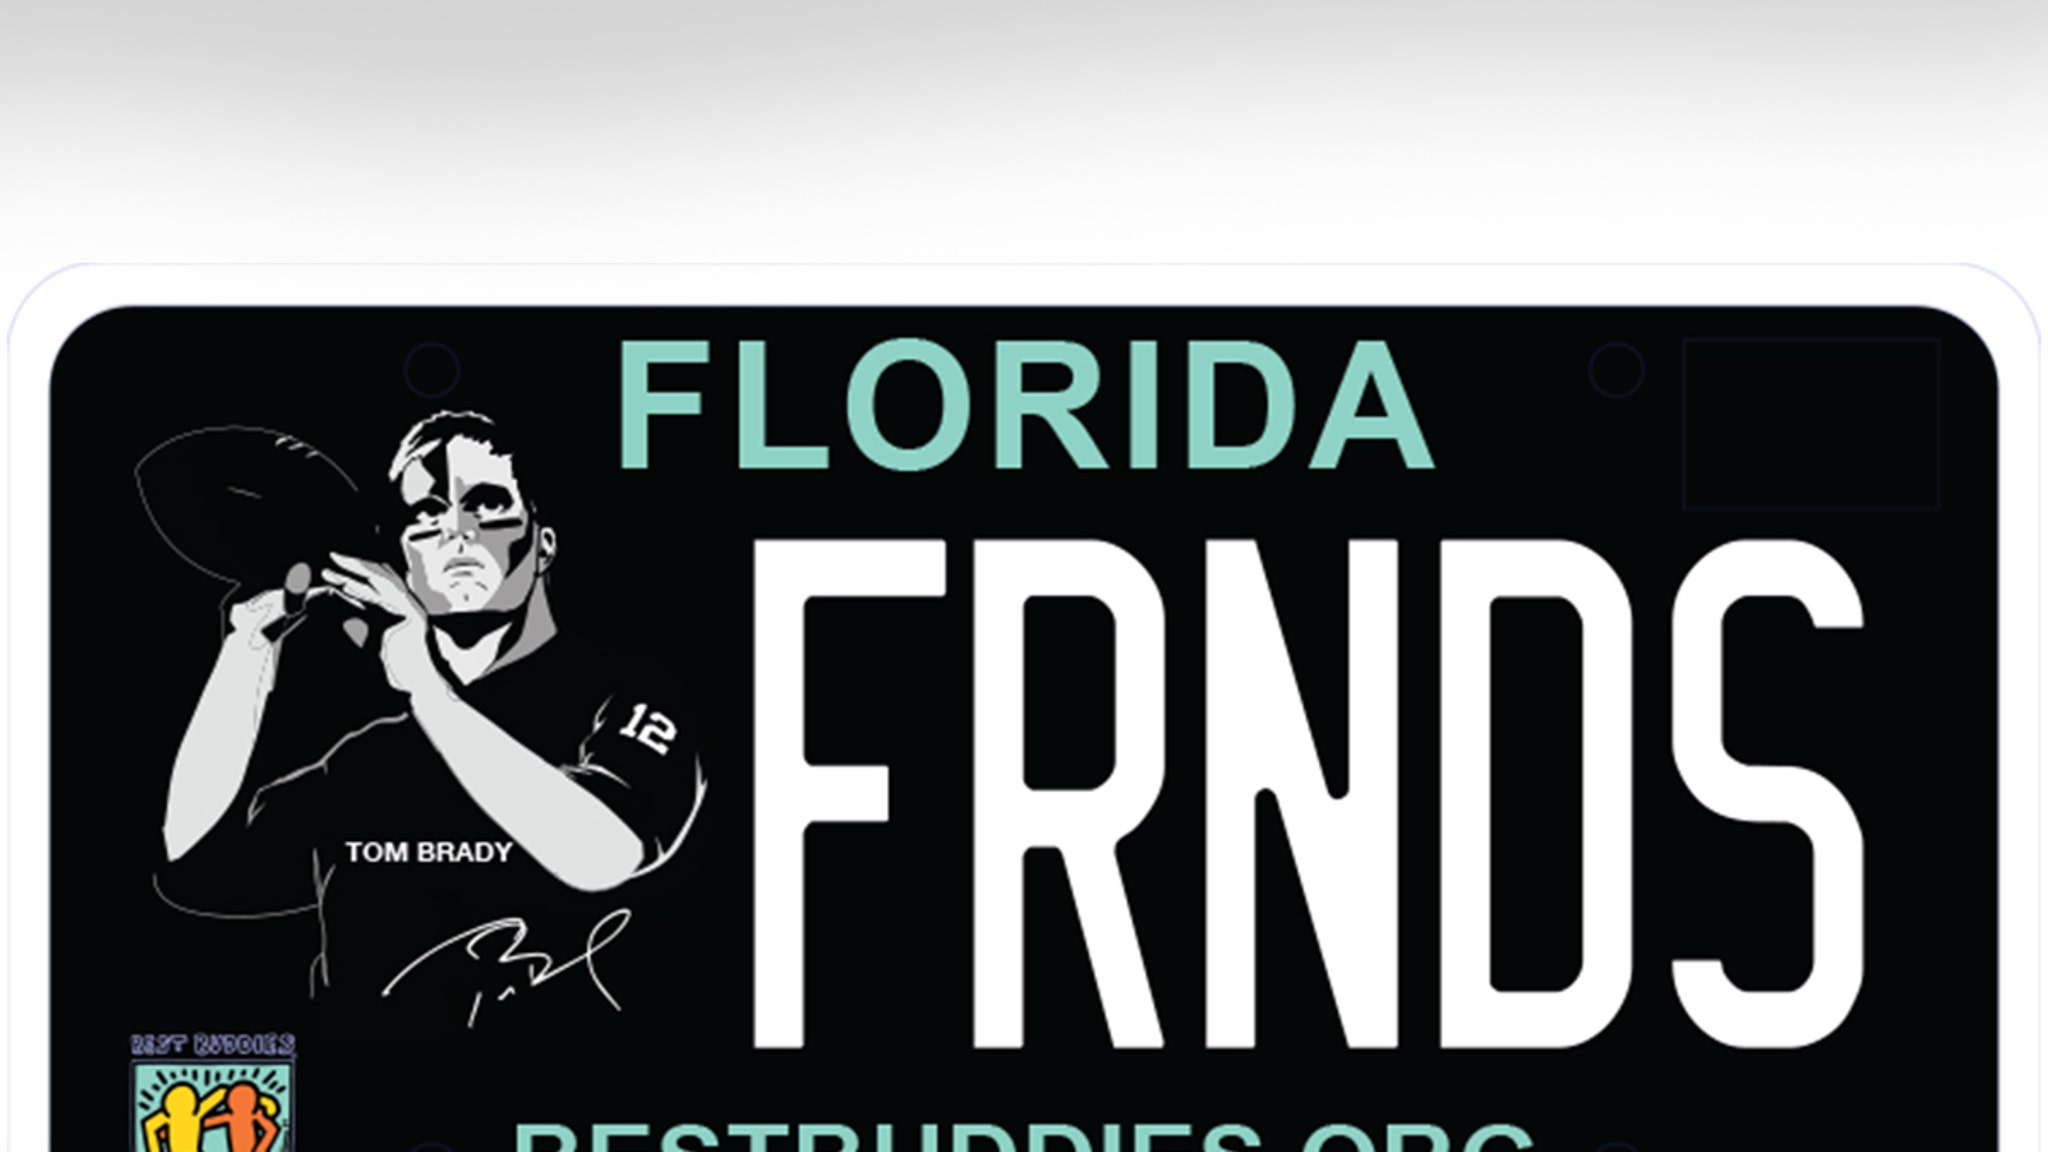 Tom Brady Featured on License Plates in Florida in Awesome Fundraiser